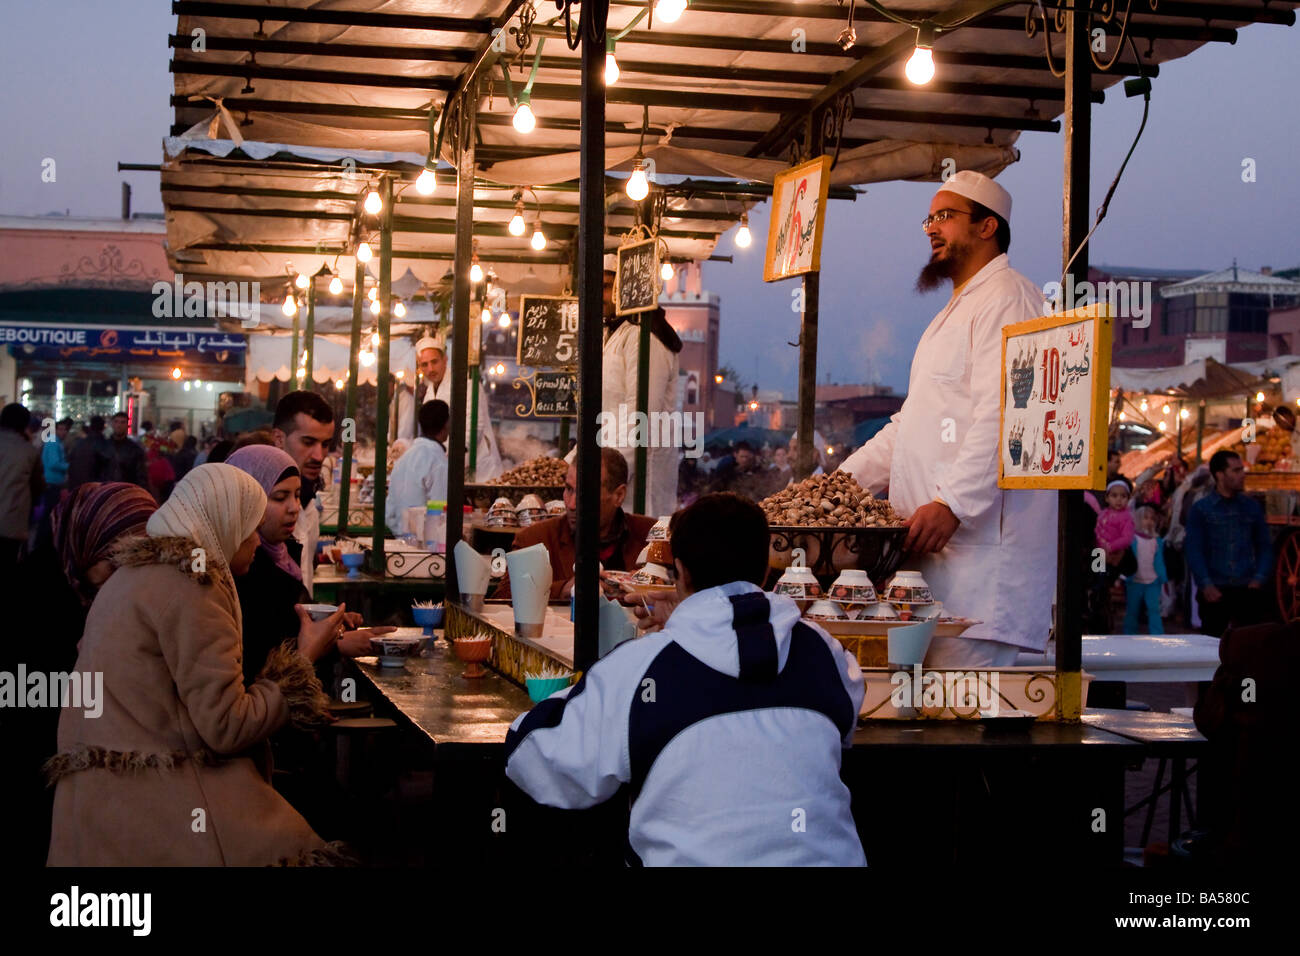 Stallholder selling soups seen at dusk amongst the many restaurant stalls that offer food to locals and tourists, Marrakech Stock Photo